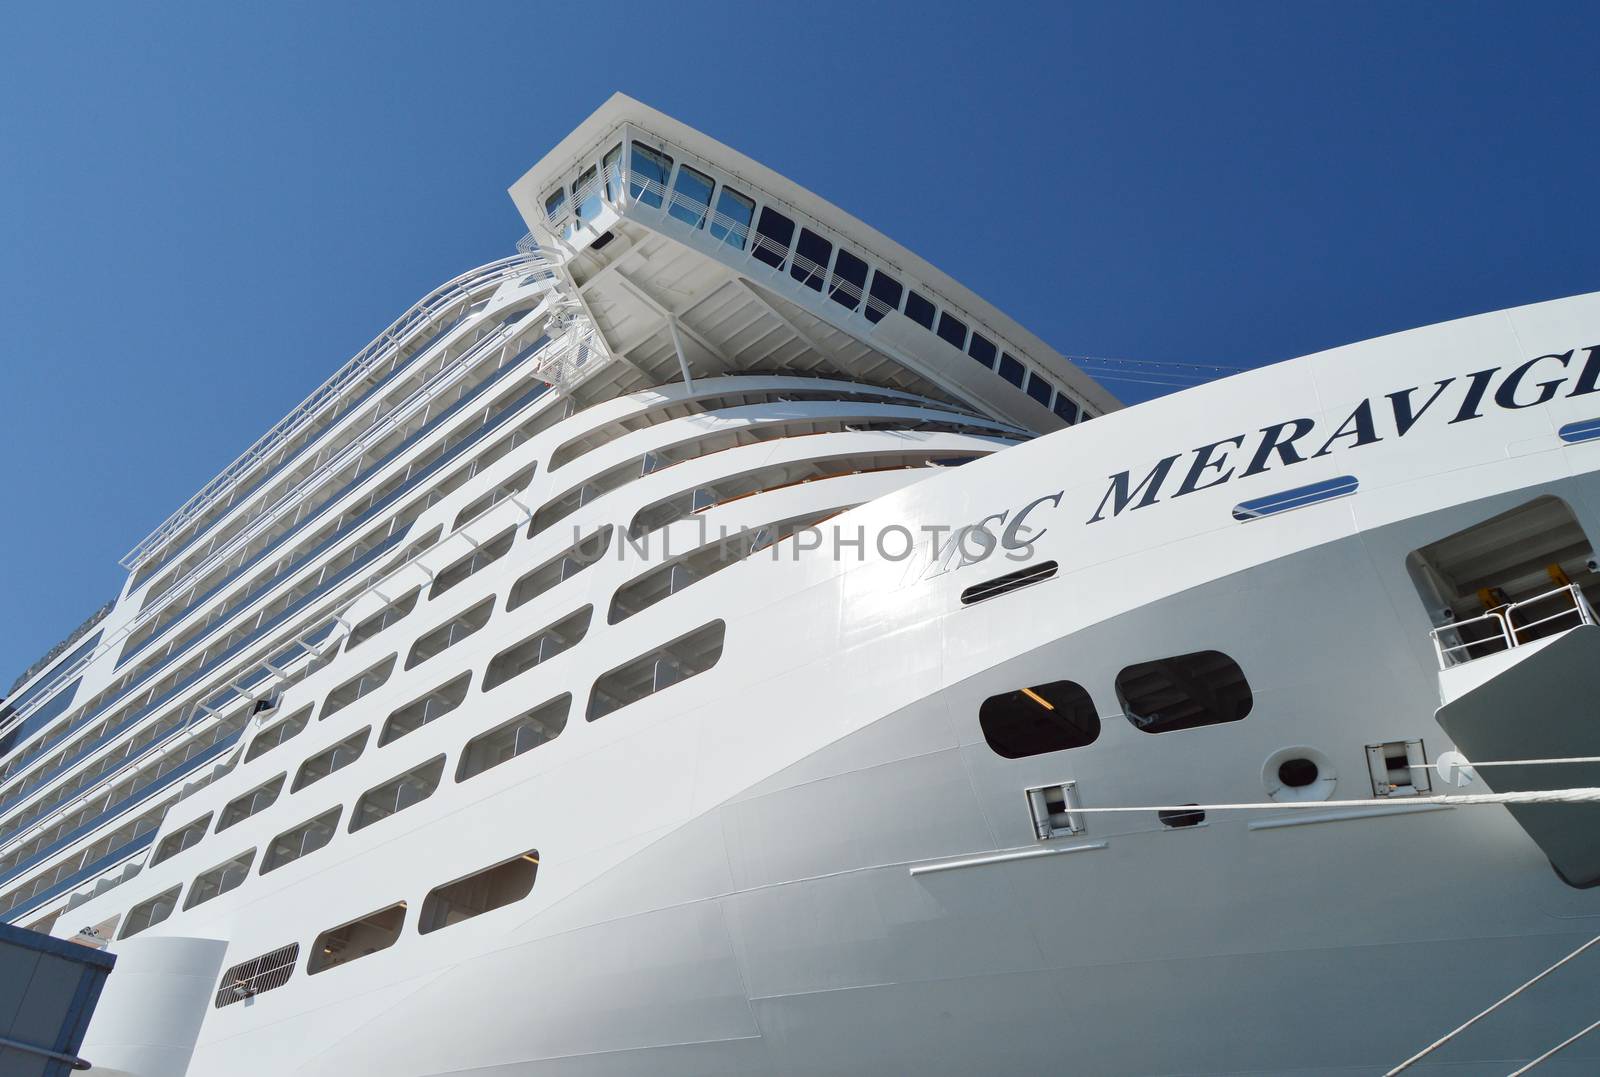 Close-up of luxury cruise liner MSC Meraviglia, the name of the ship is written on the starboard side, October 7, 2018 by claire_lucia